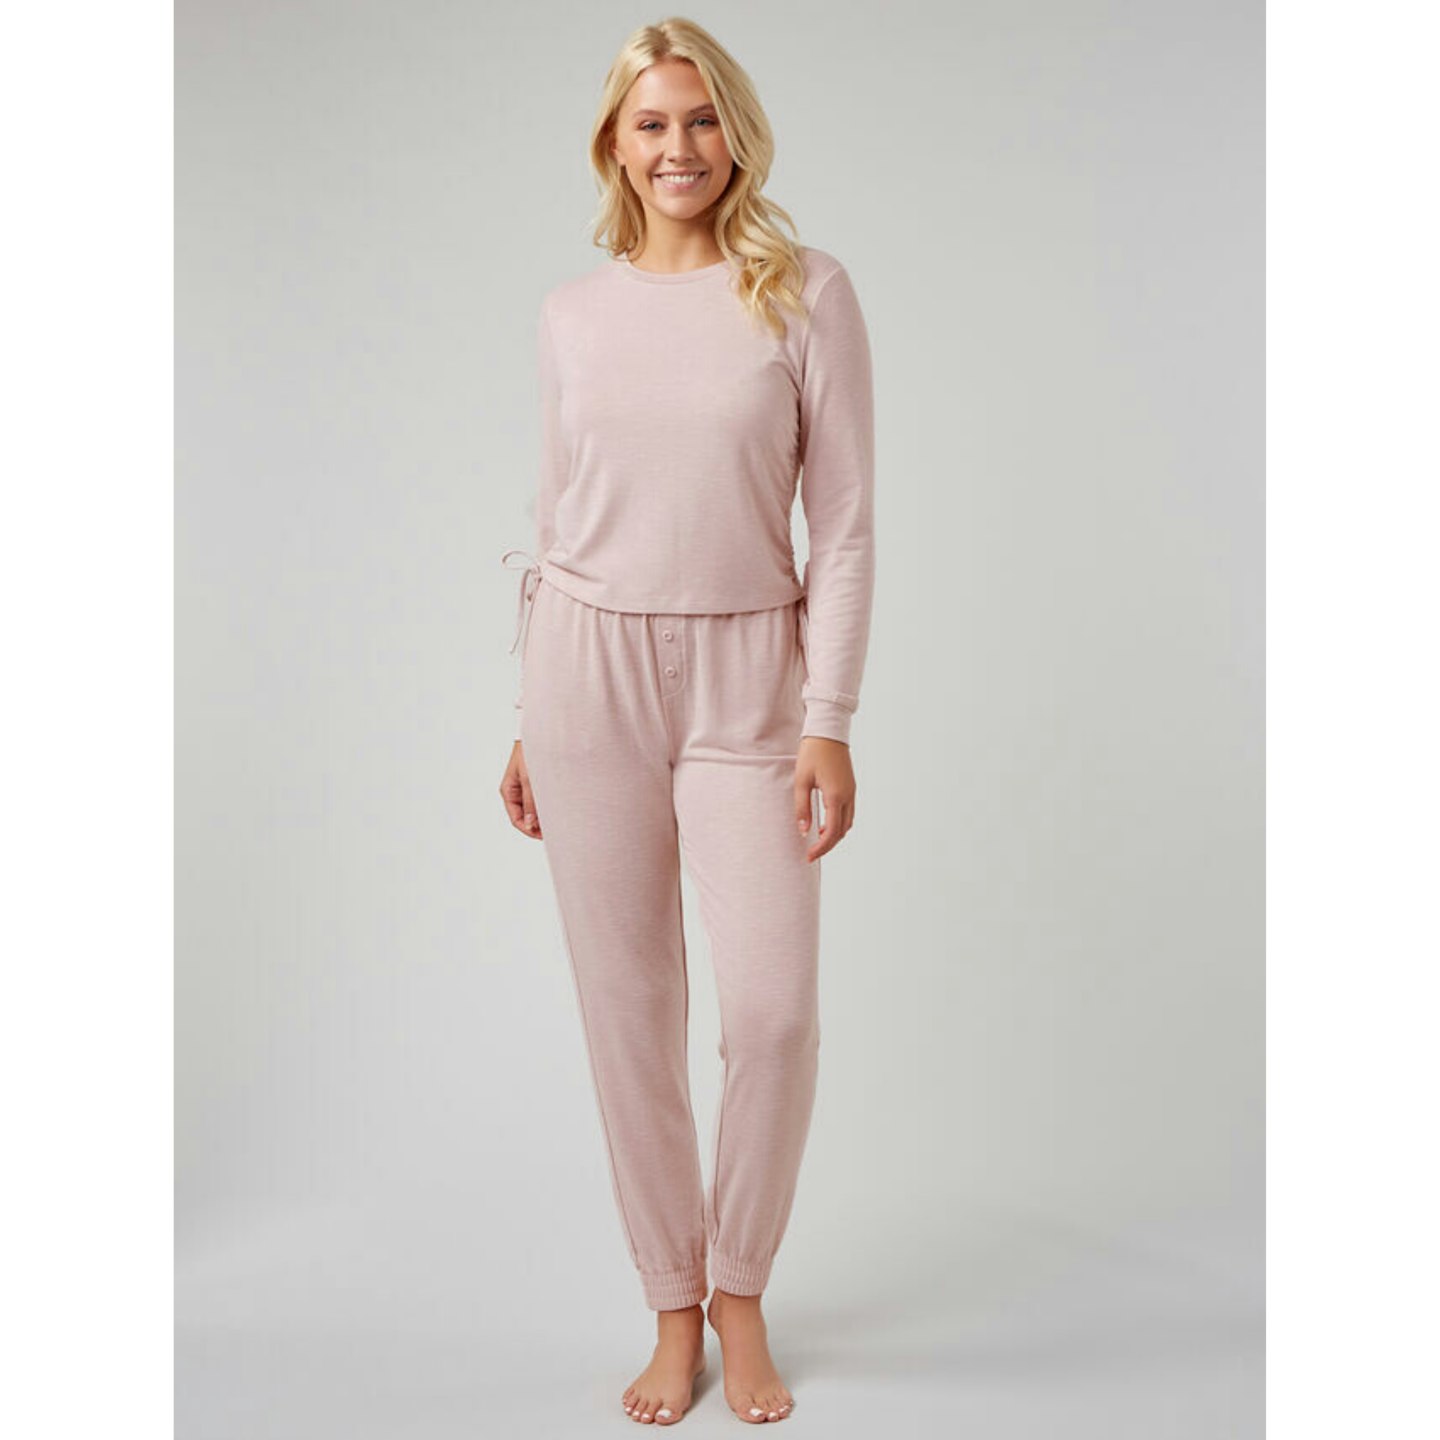 Lounge ruched top and joggers set